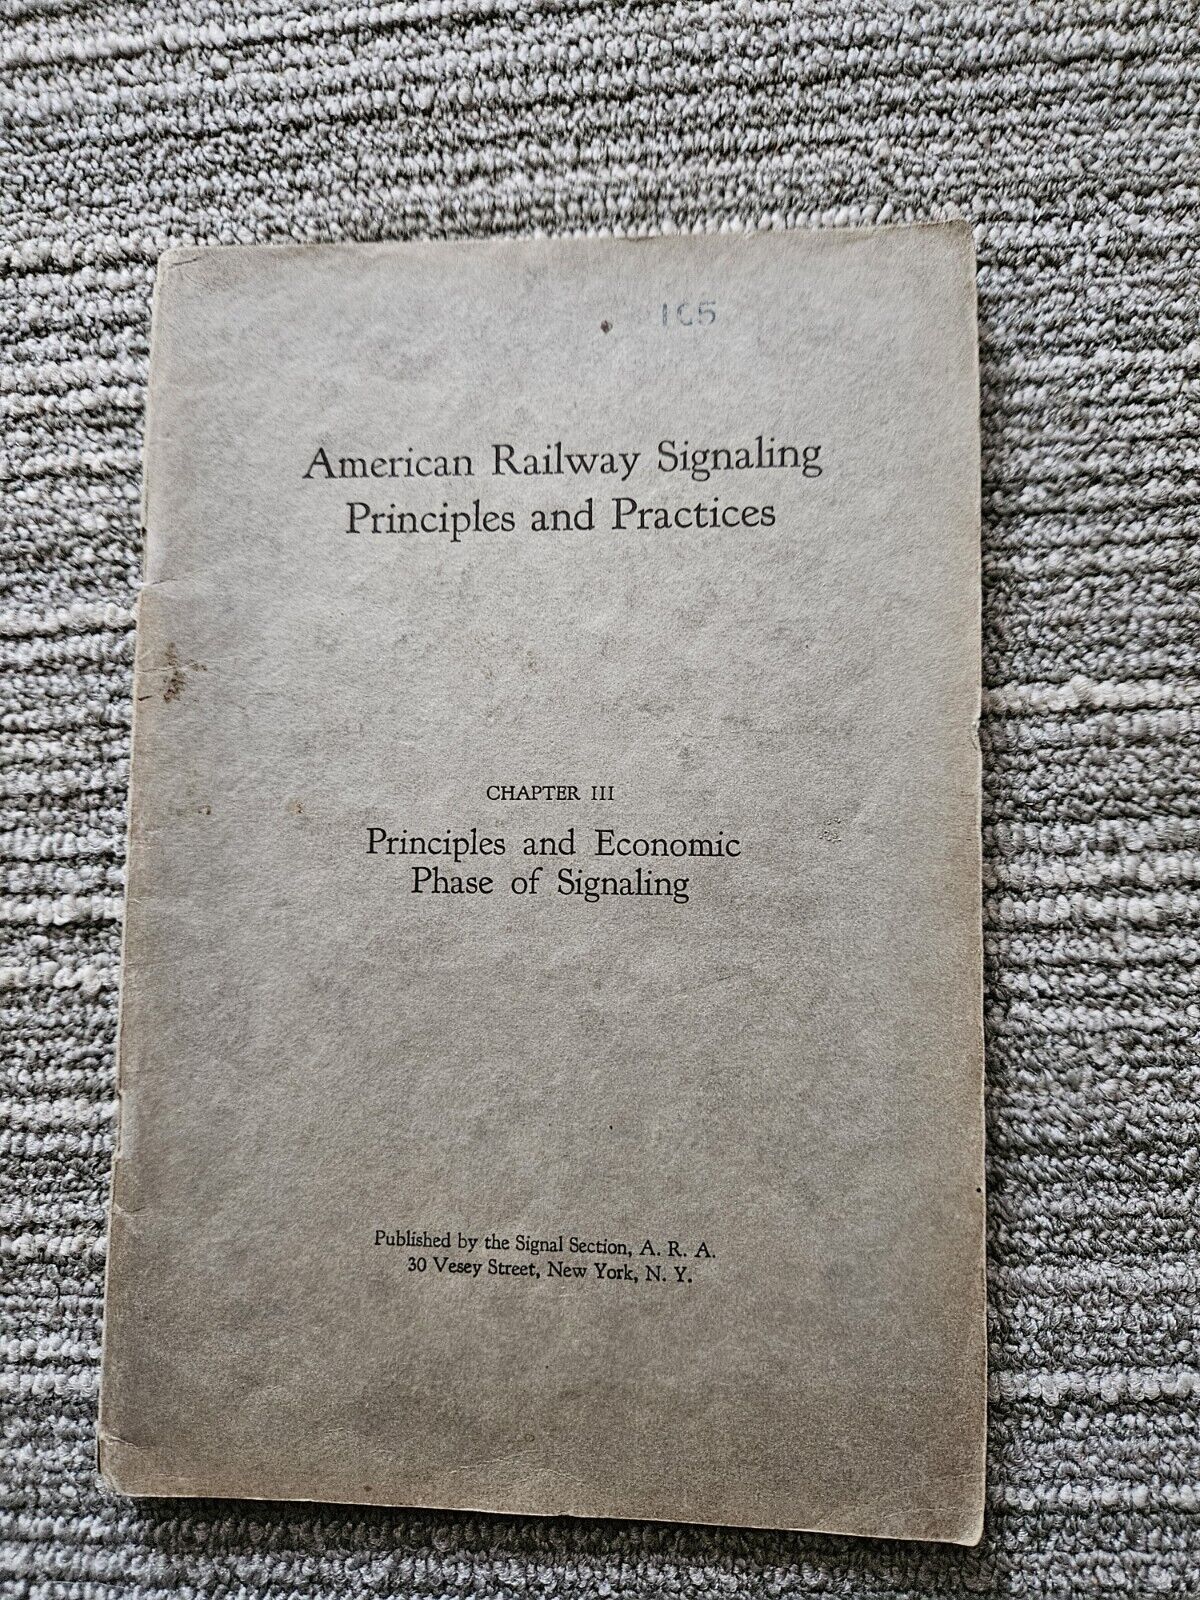 American Railway Signaling Principles And Practices: Principles And Economic...